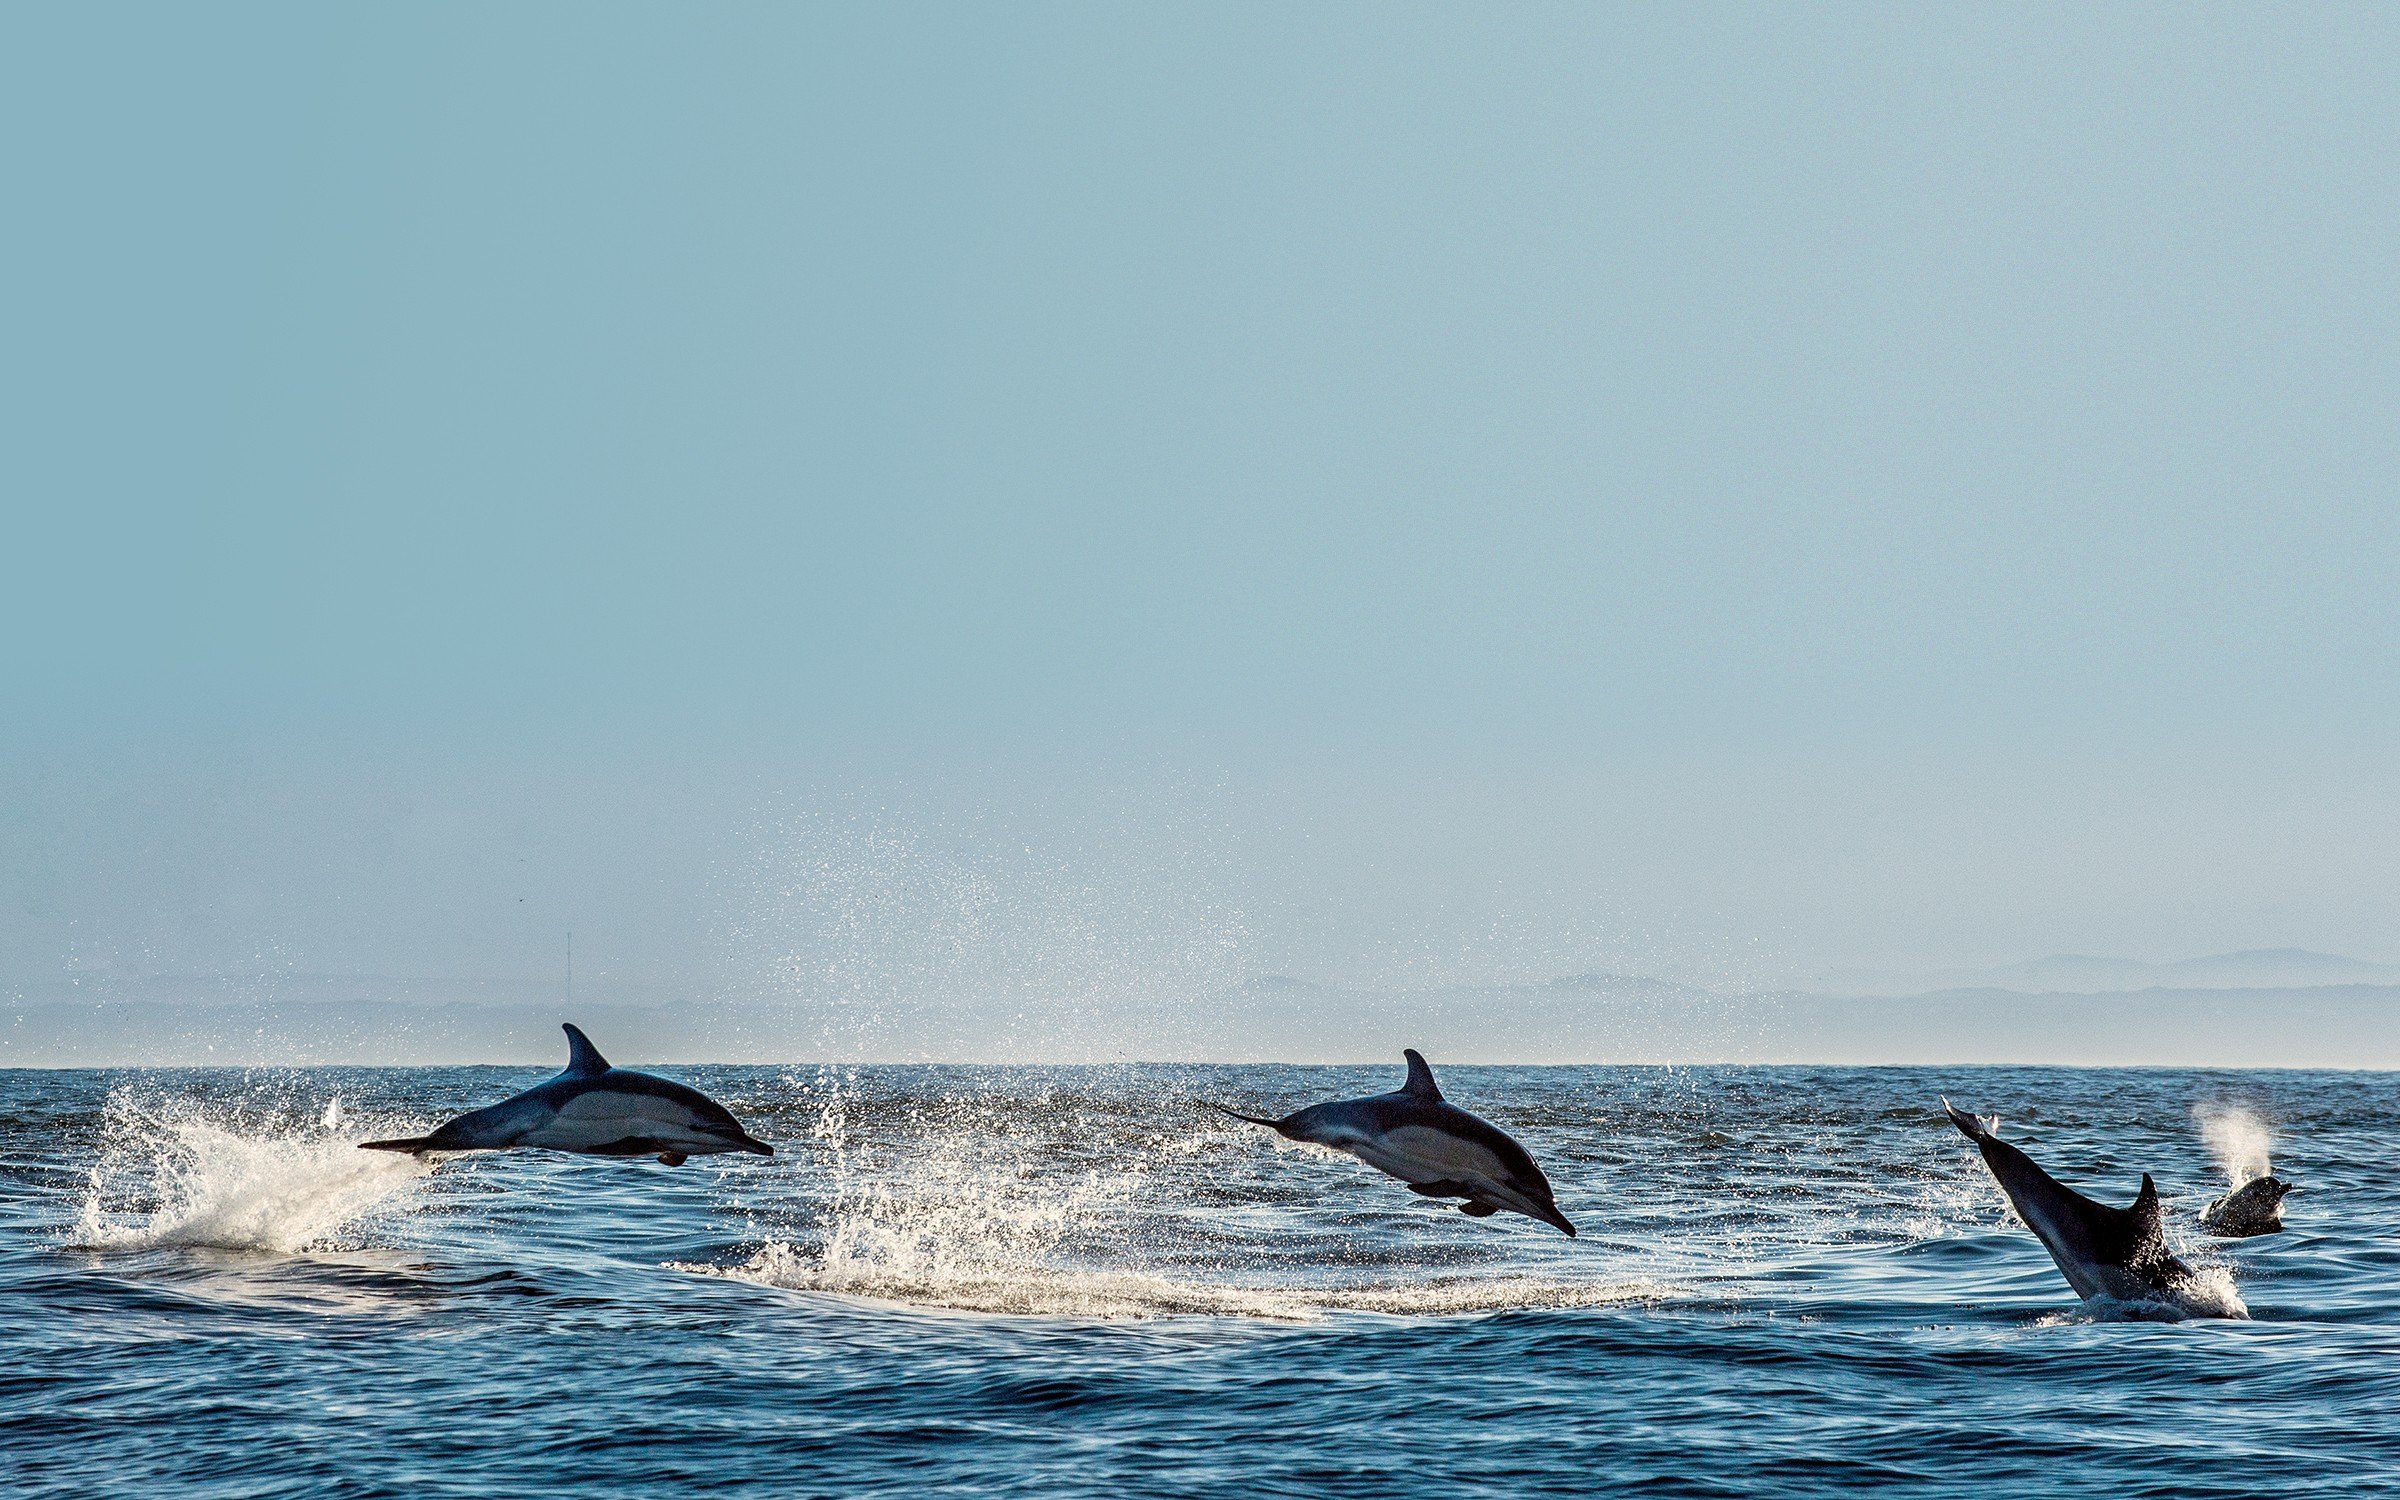 Dolphins belong in the sea, not in aquariums. Photo: Shutterstock